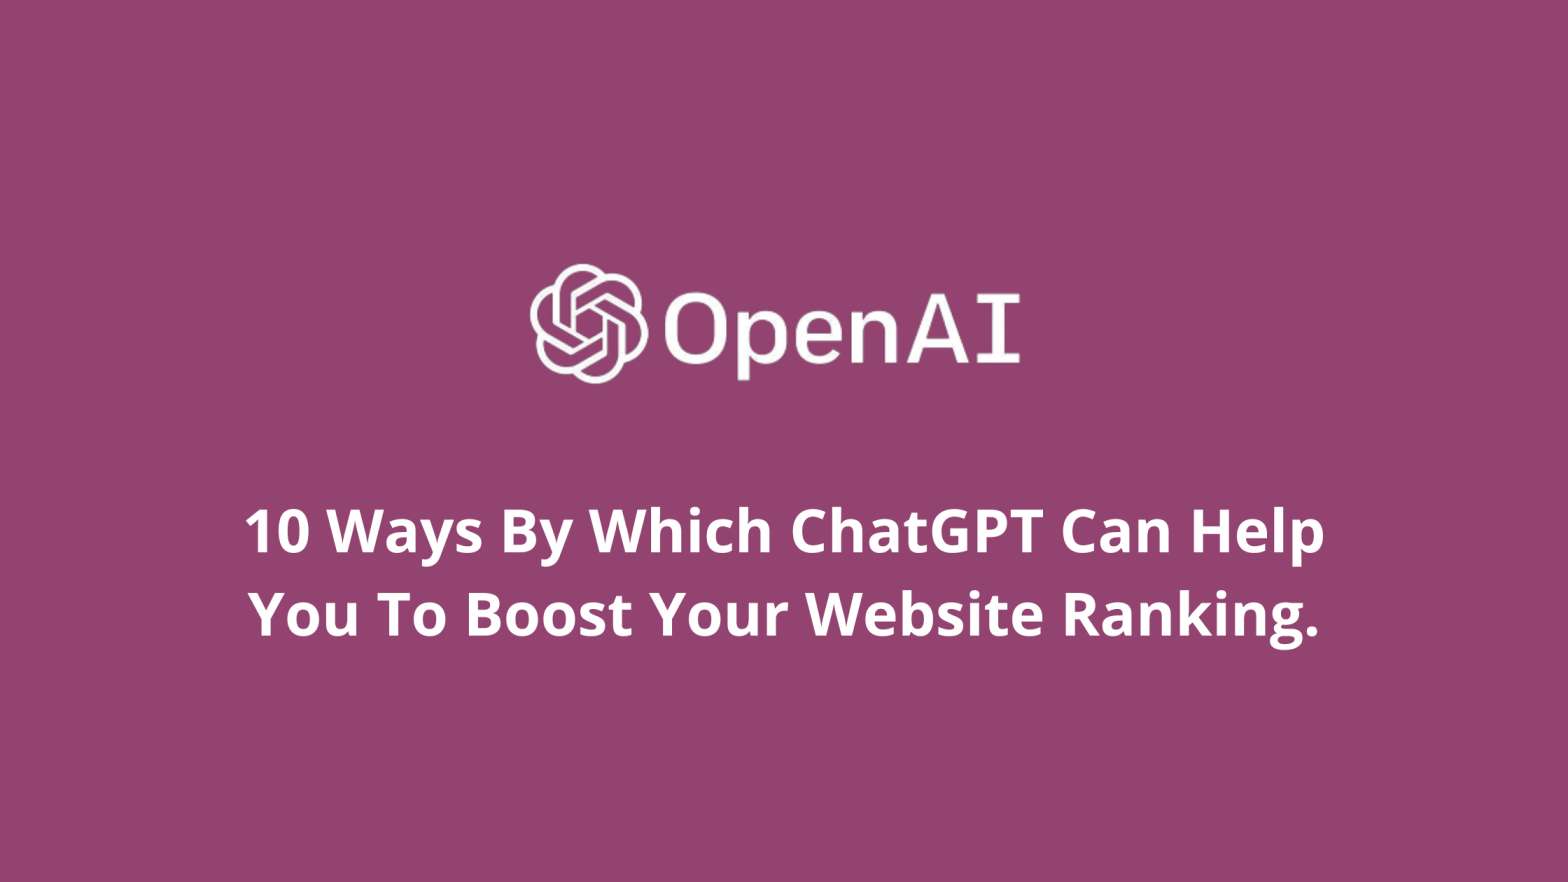 10 Ways By Which ChatGPT Can Help You To Boost Your Website Ranking.